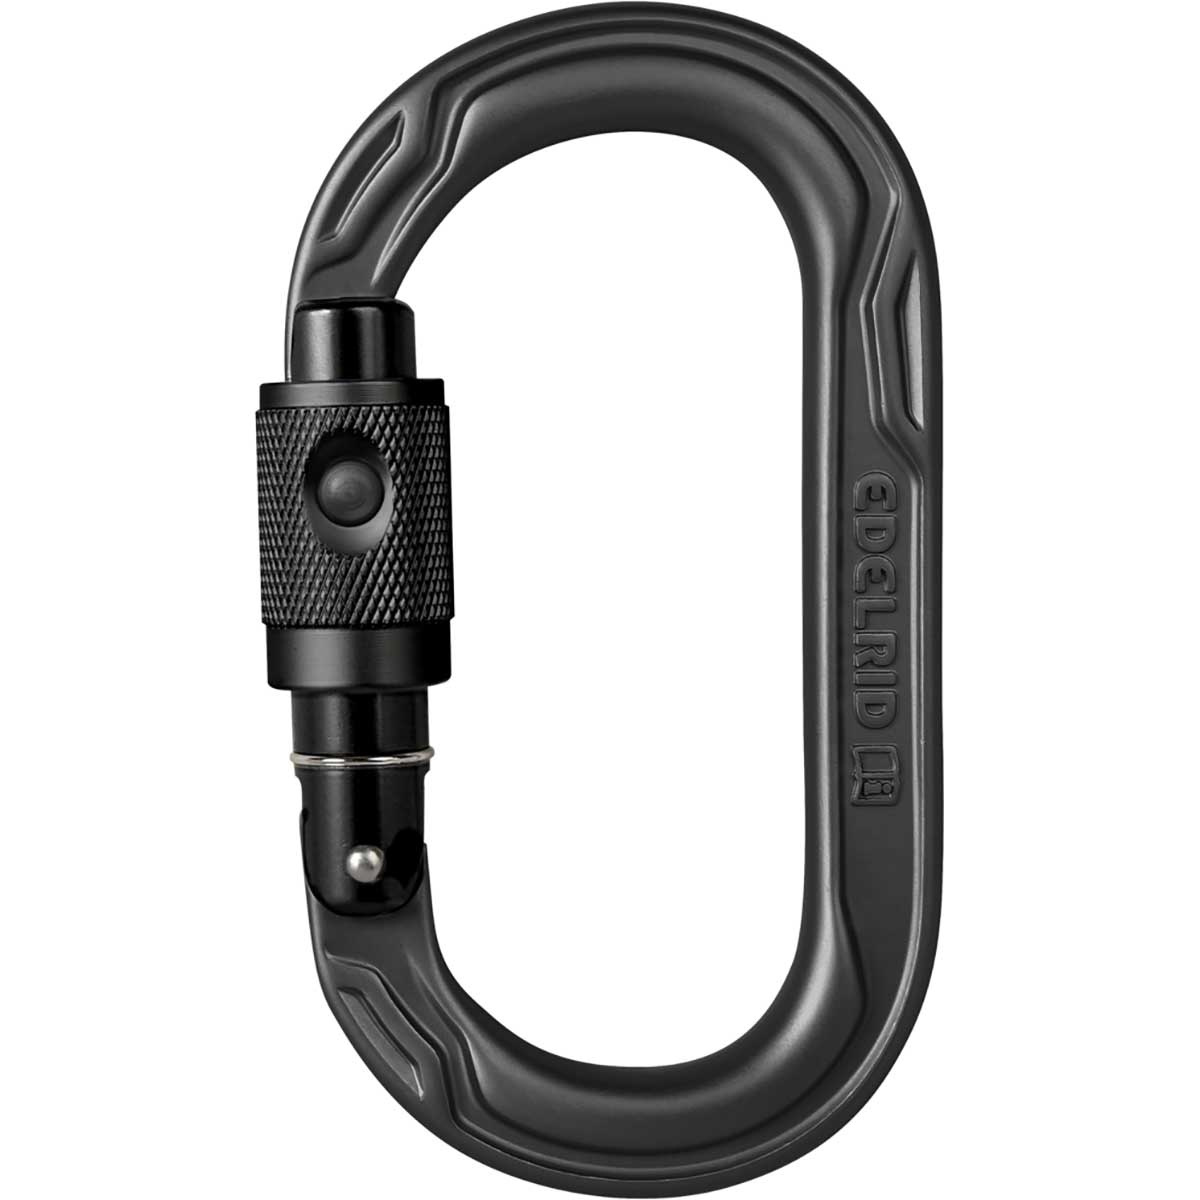 Image of Edelrid Moschettone Oval Power 2500 Permalock